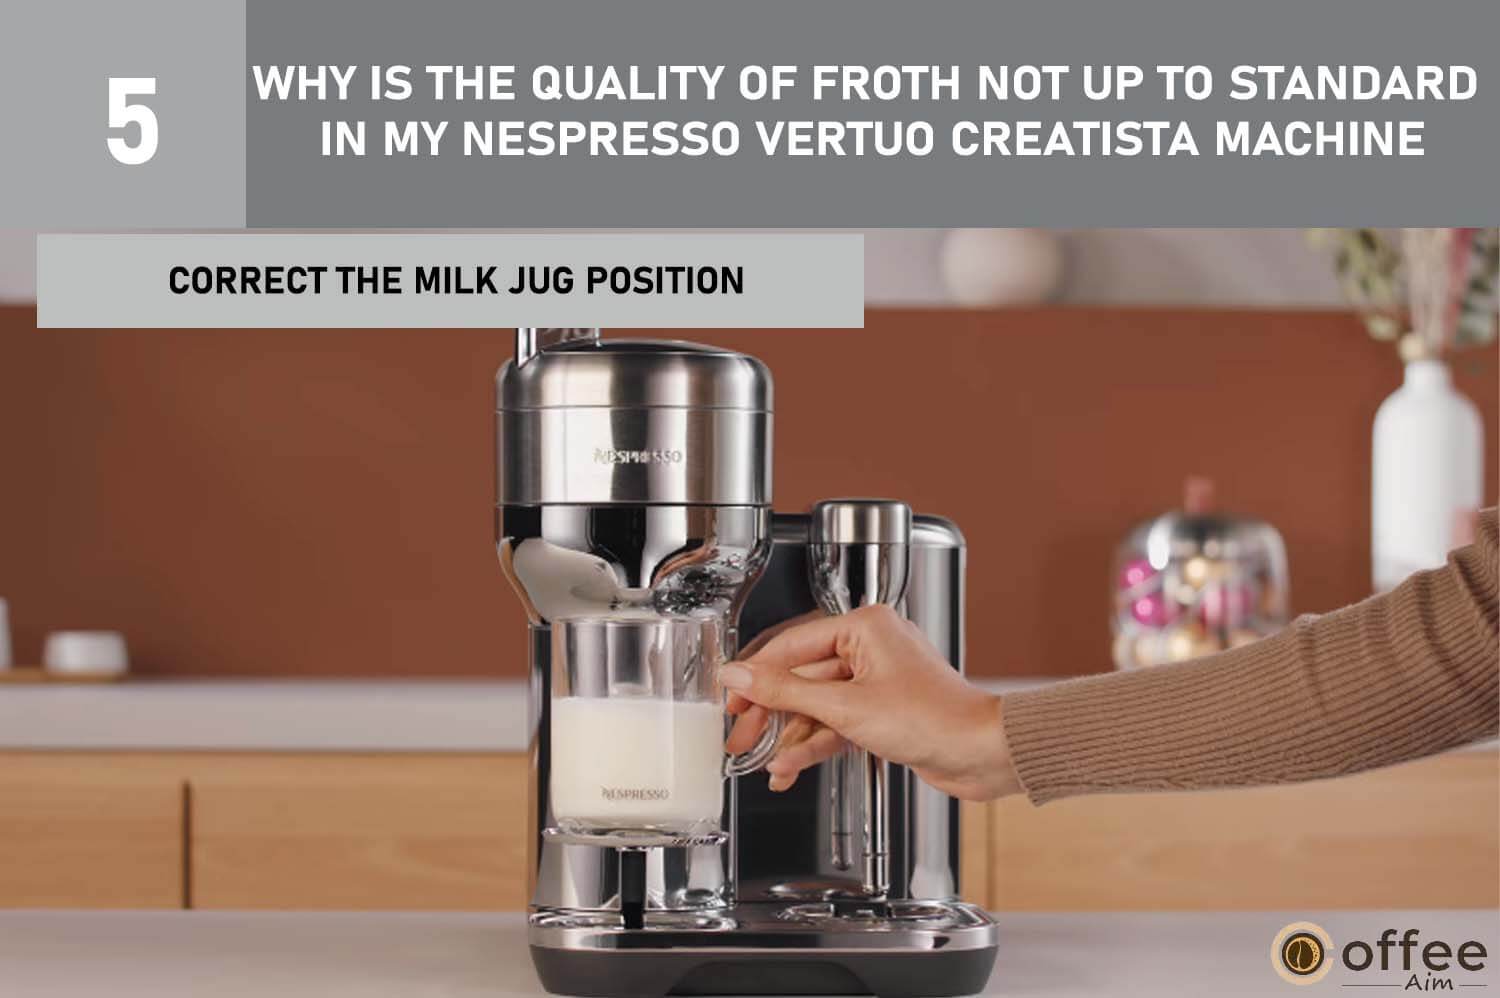 Adjust the milk jug on your Nespresso Vertuo Creatista correctly for better froth. Follow these steps in the article.